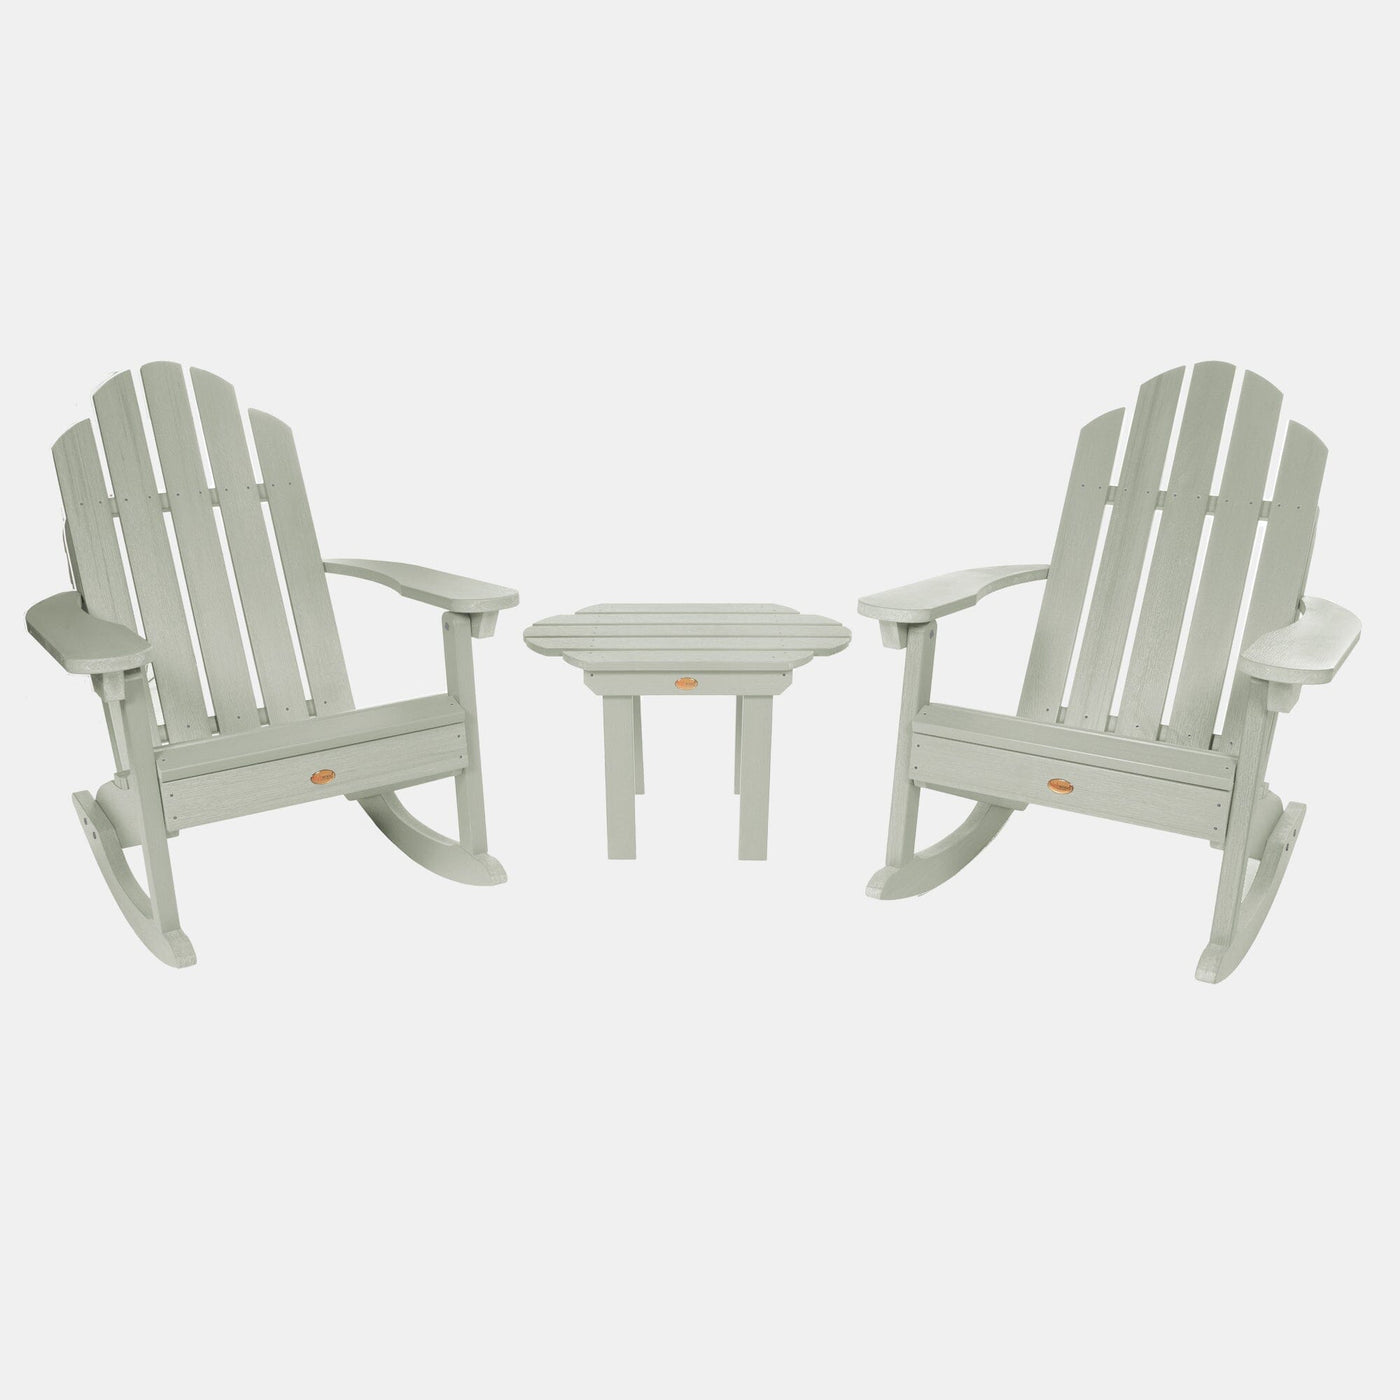 Classic Westport Rocking Chair and Table Set Kitted Sets Highwood USA Eucalyptus 